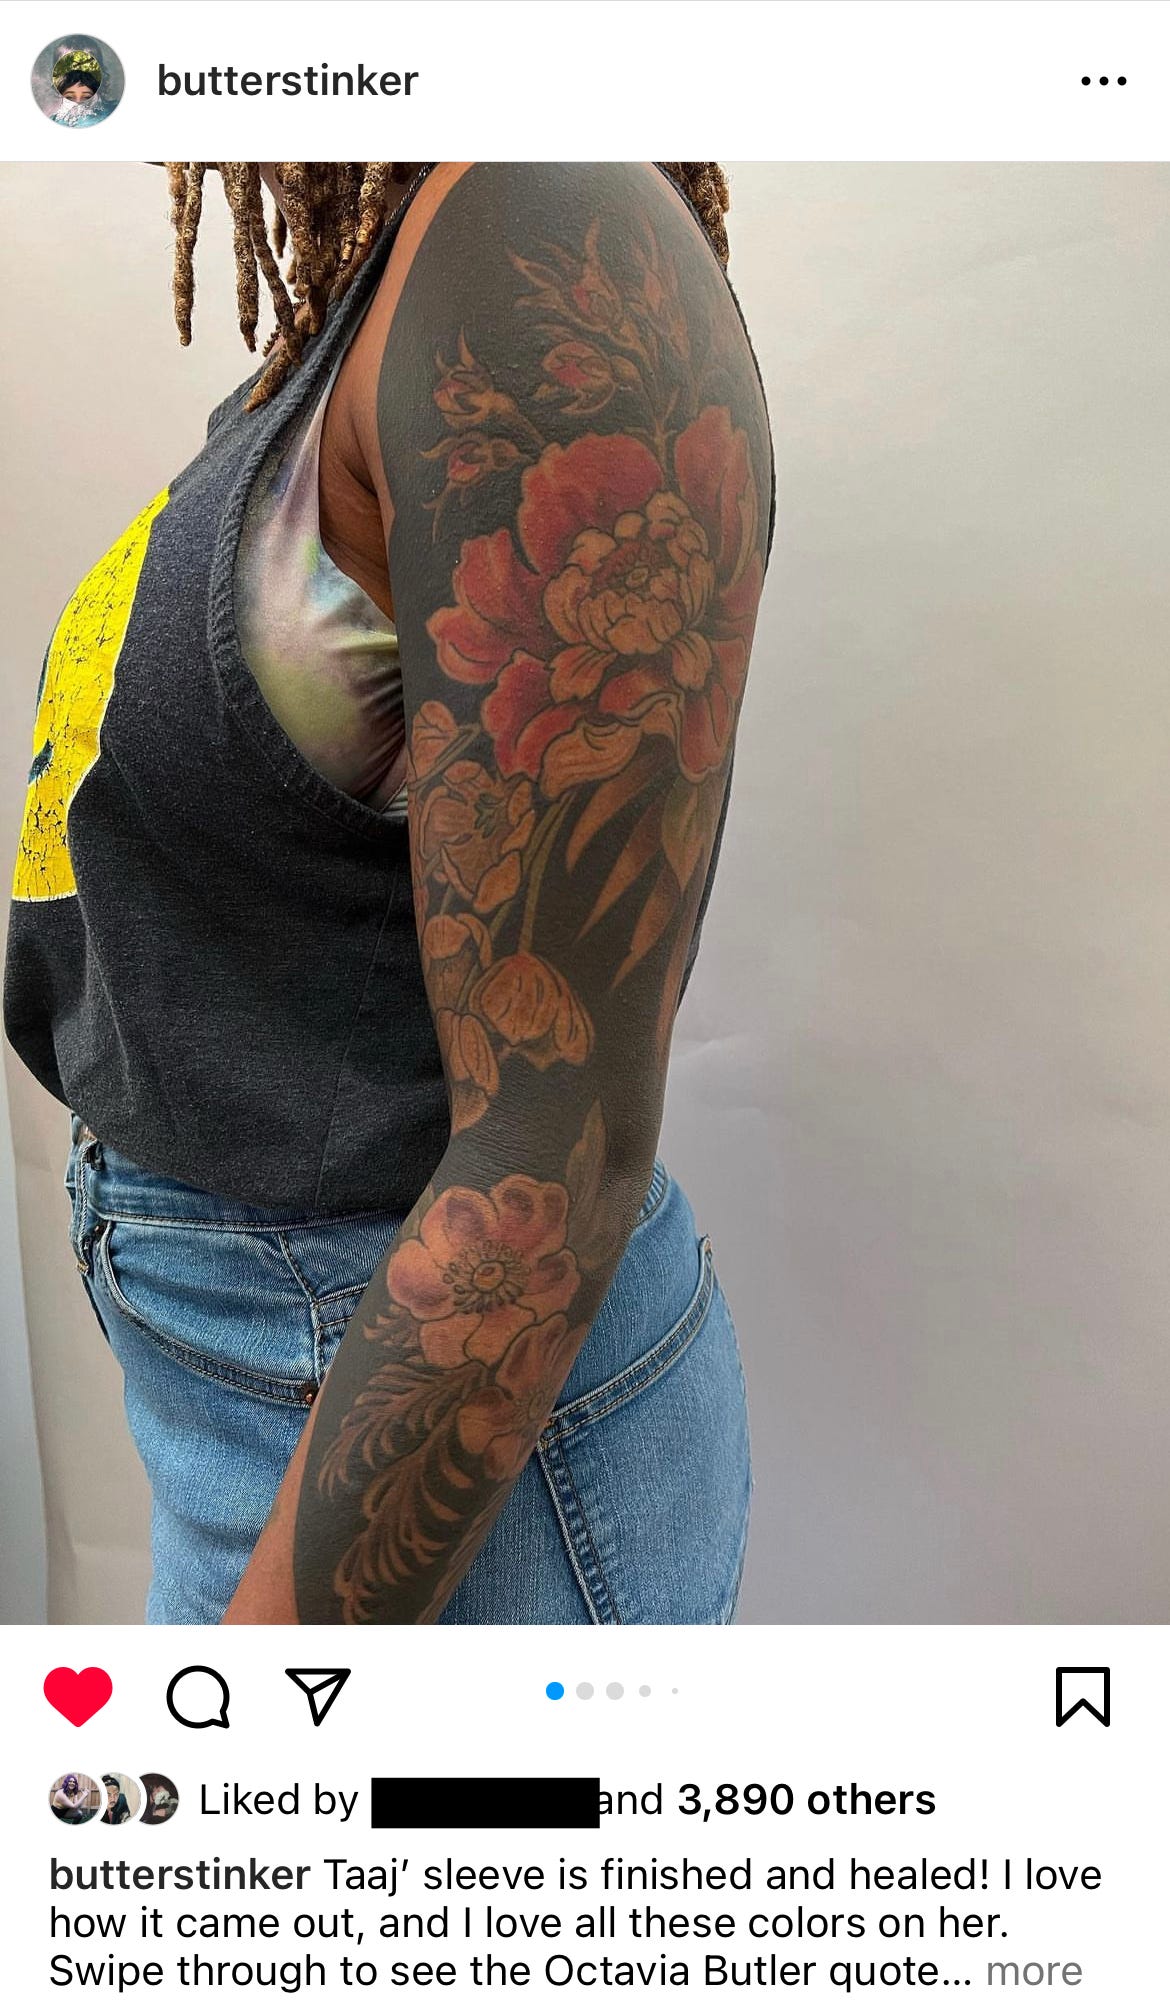 image description: the work of tattoo artist Esther Garcia, who goes by @butterstinker. The image depicts a Black woman with a full tattoo sleeve with a mix of botanical and blackout elements in colour.